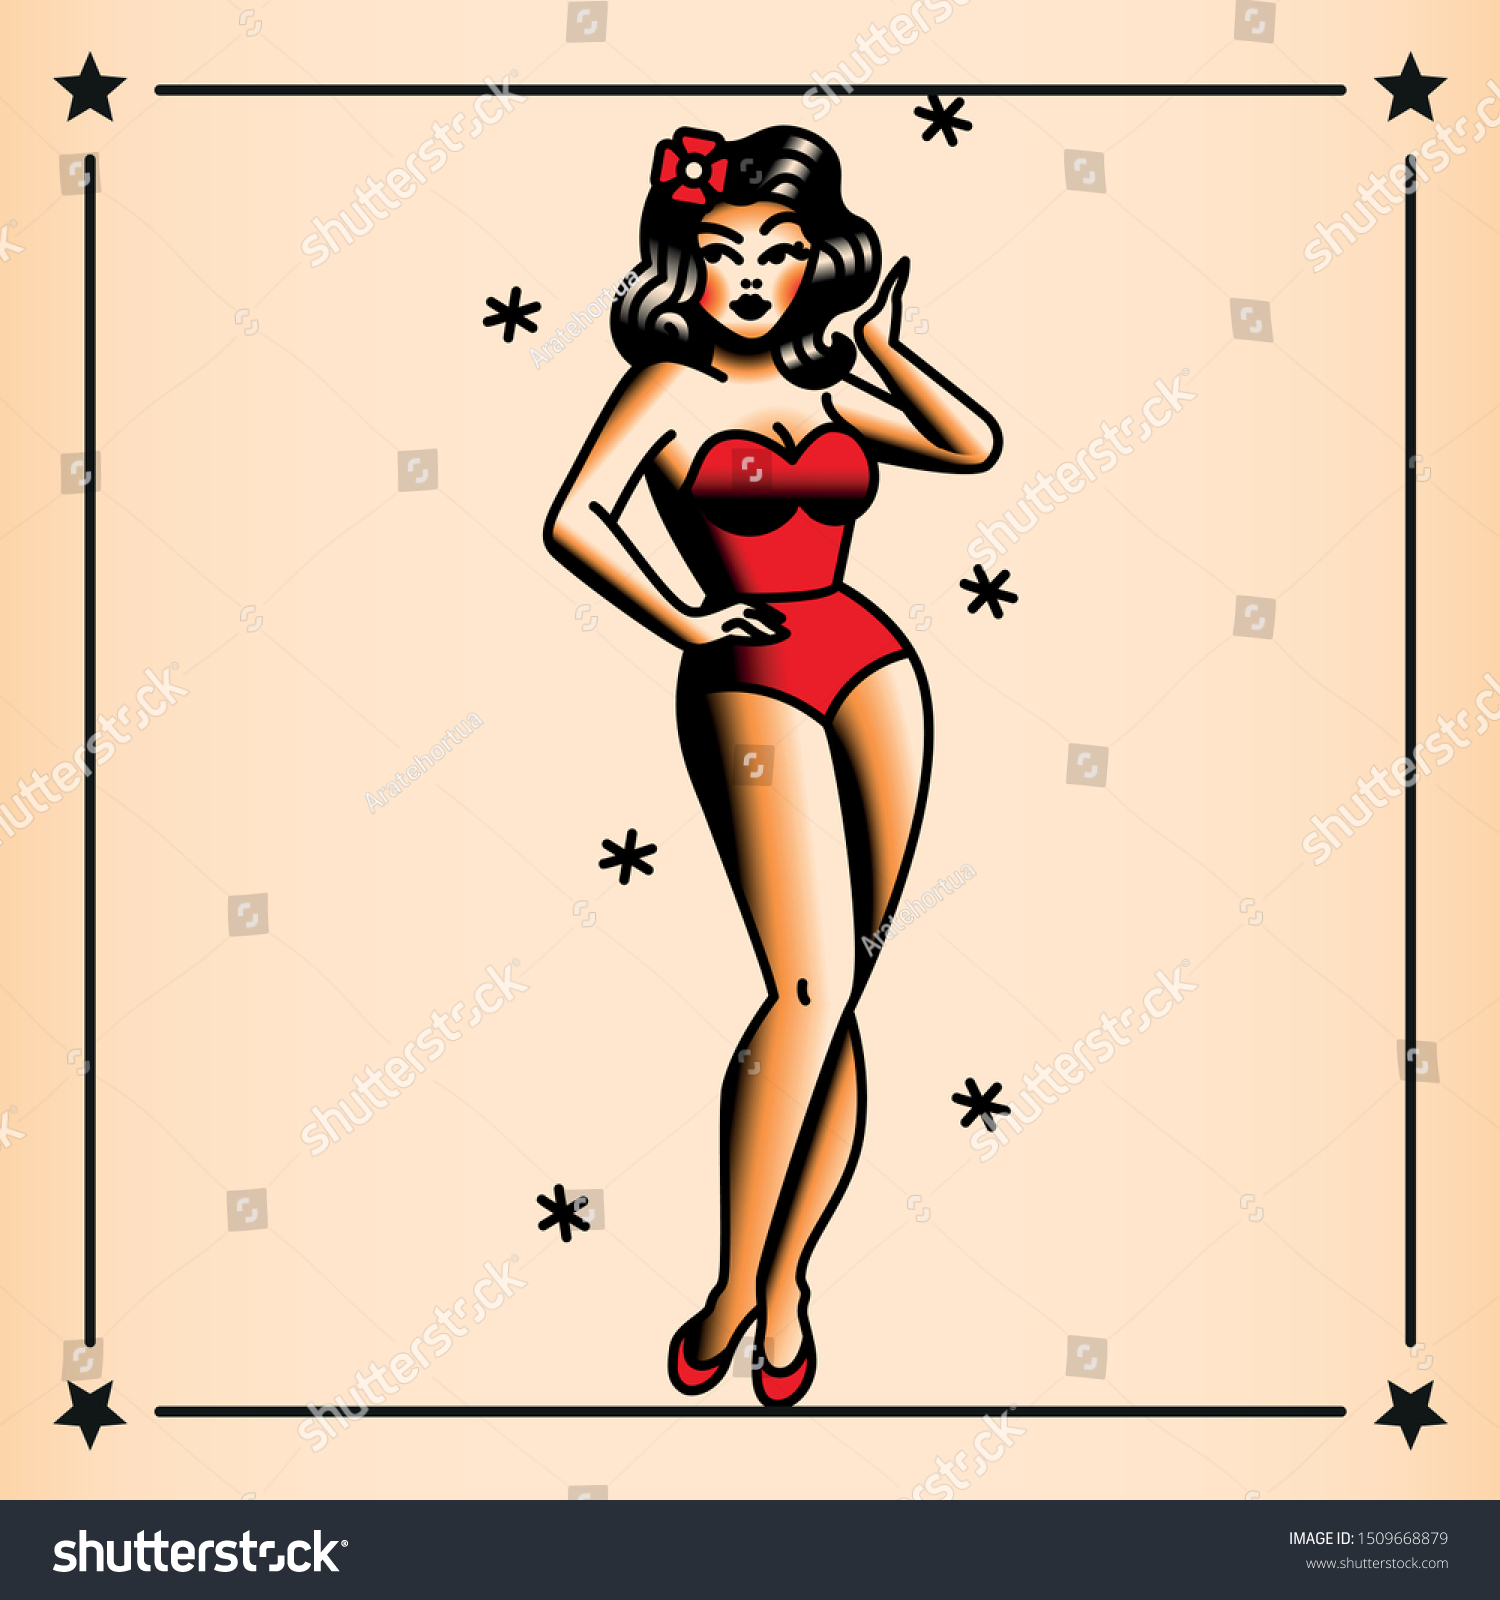 Vector Old School Style Pinup Tattoo Stock Vector Royalty Free ...